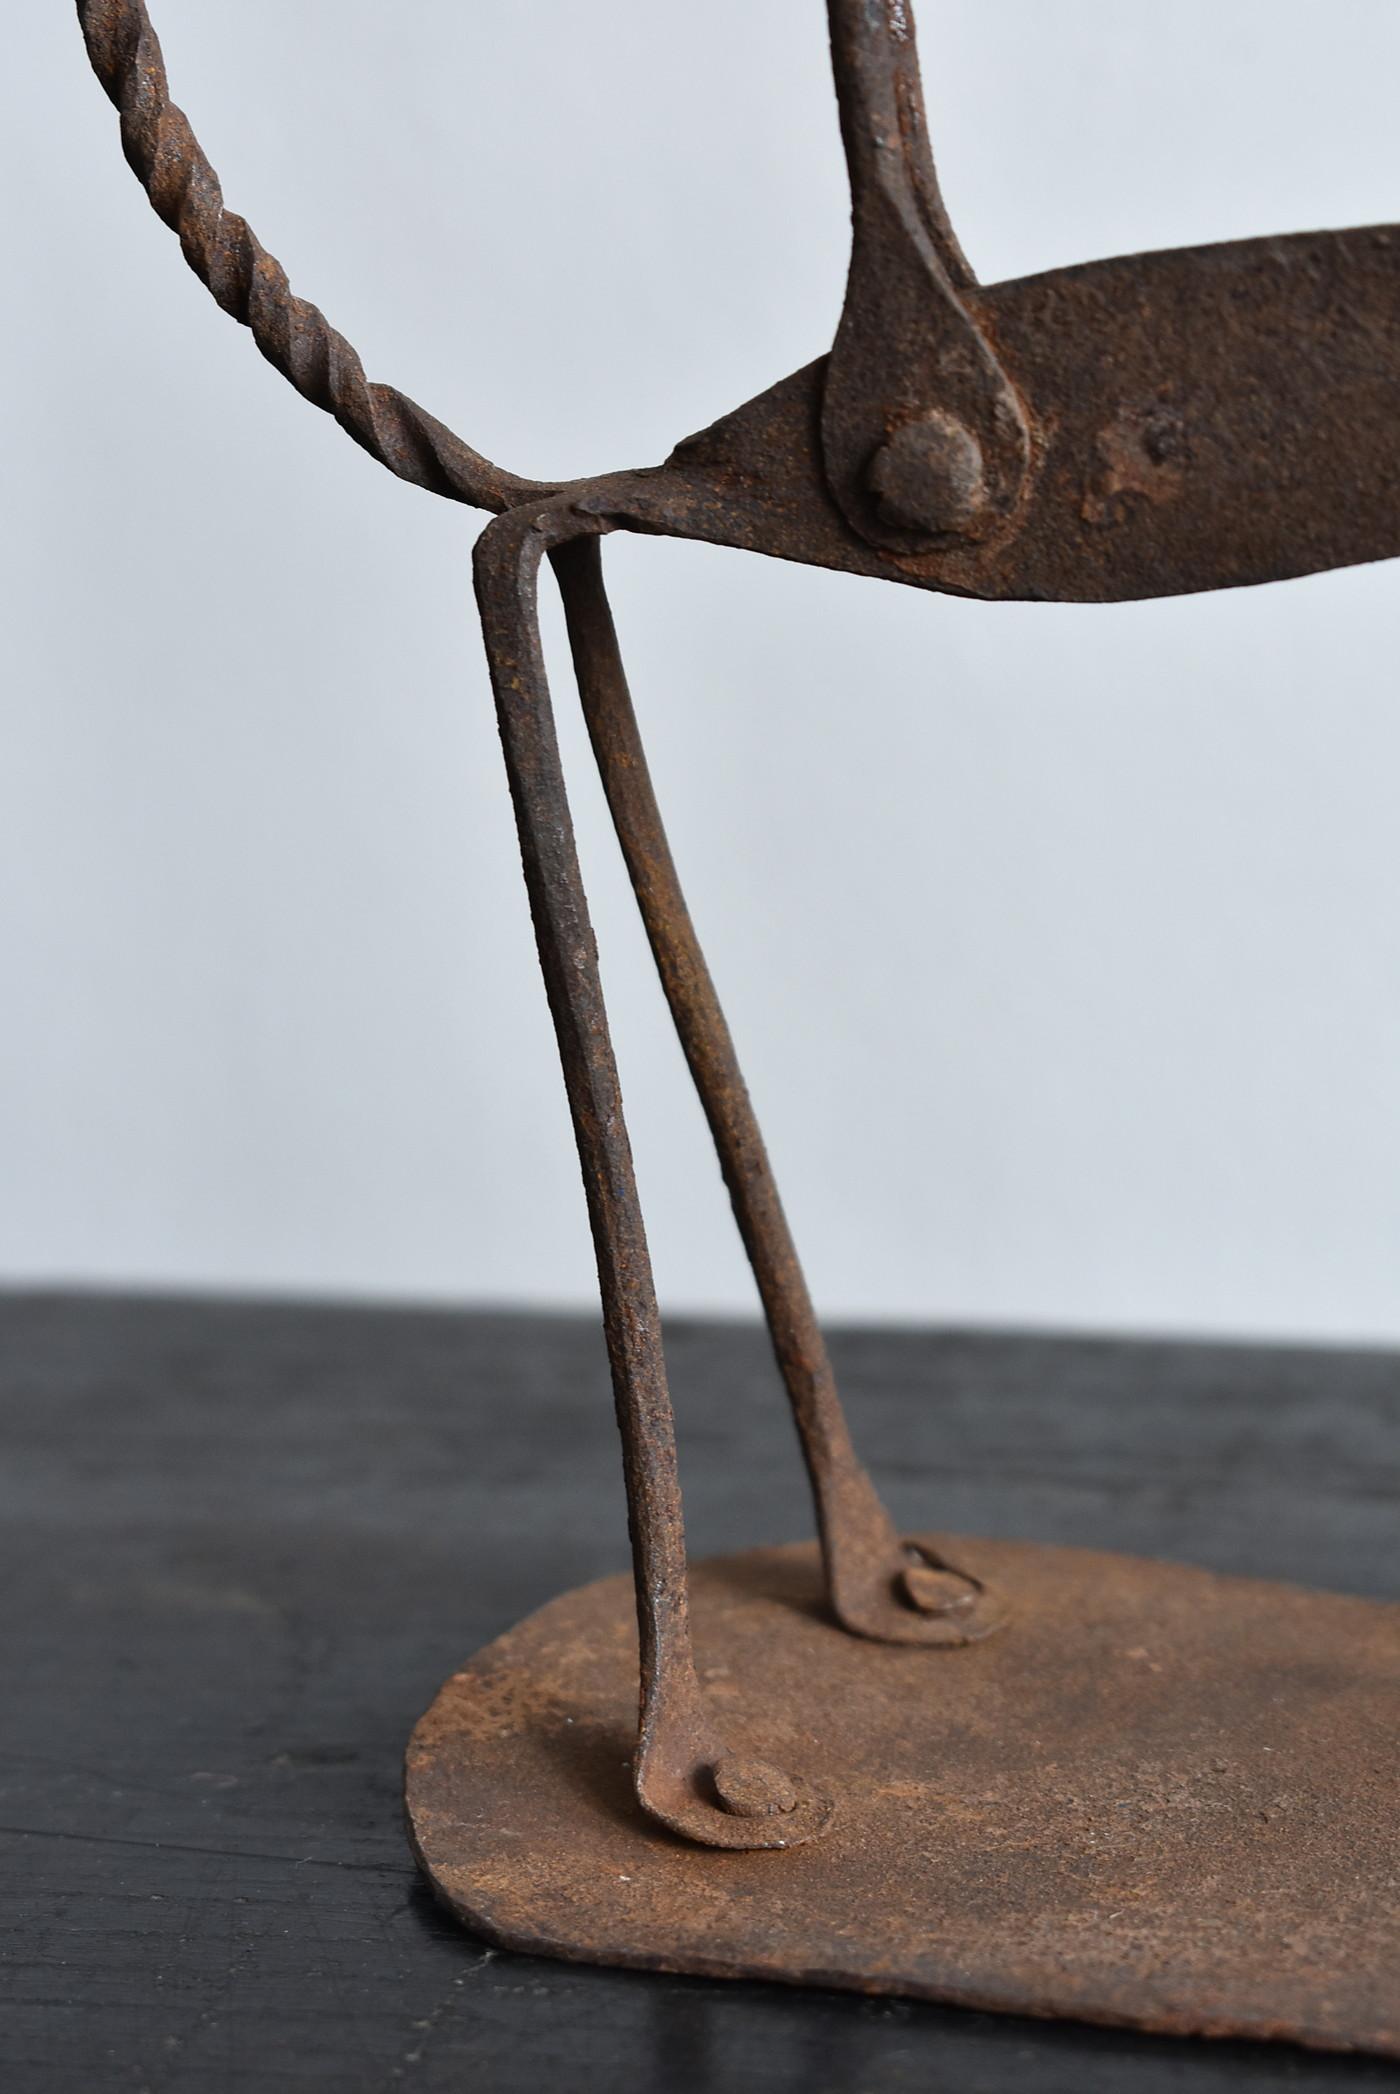 Hand-Crafted 20th Century-African, Iron Object Made by the Lobi Tribe of Burkina Faso, Africa